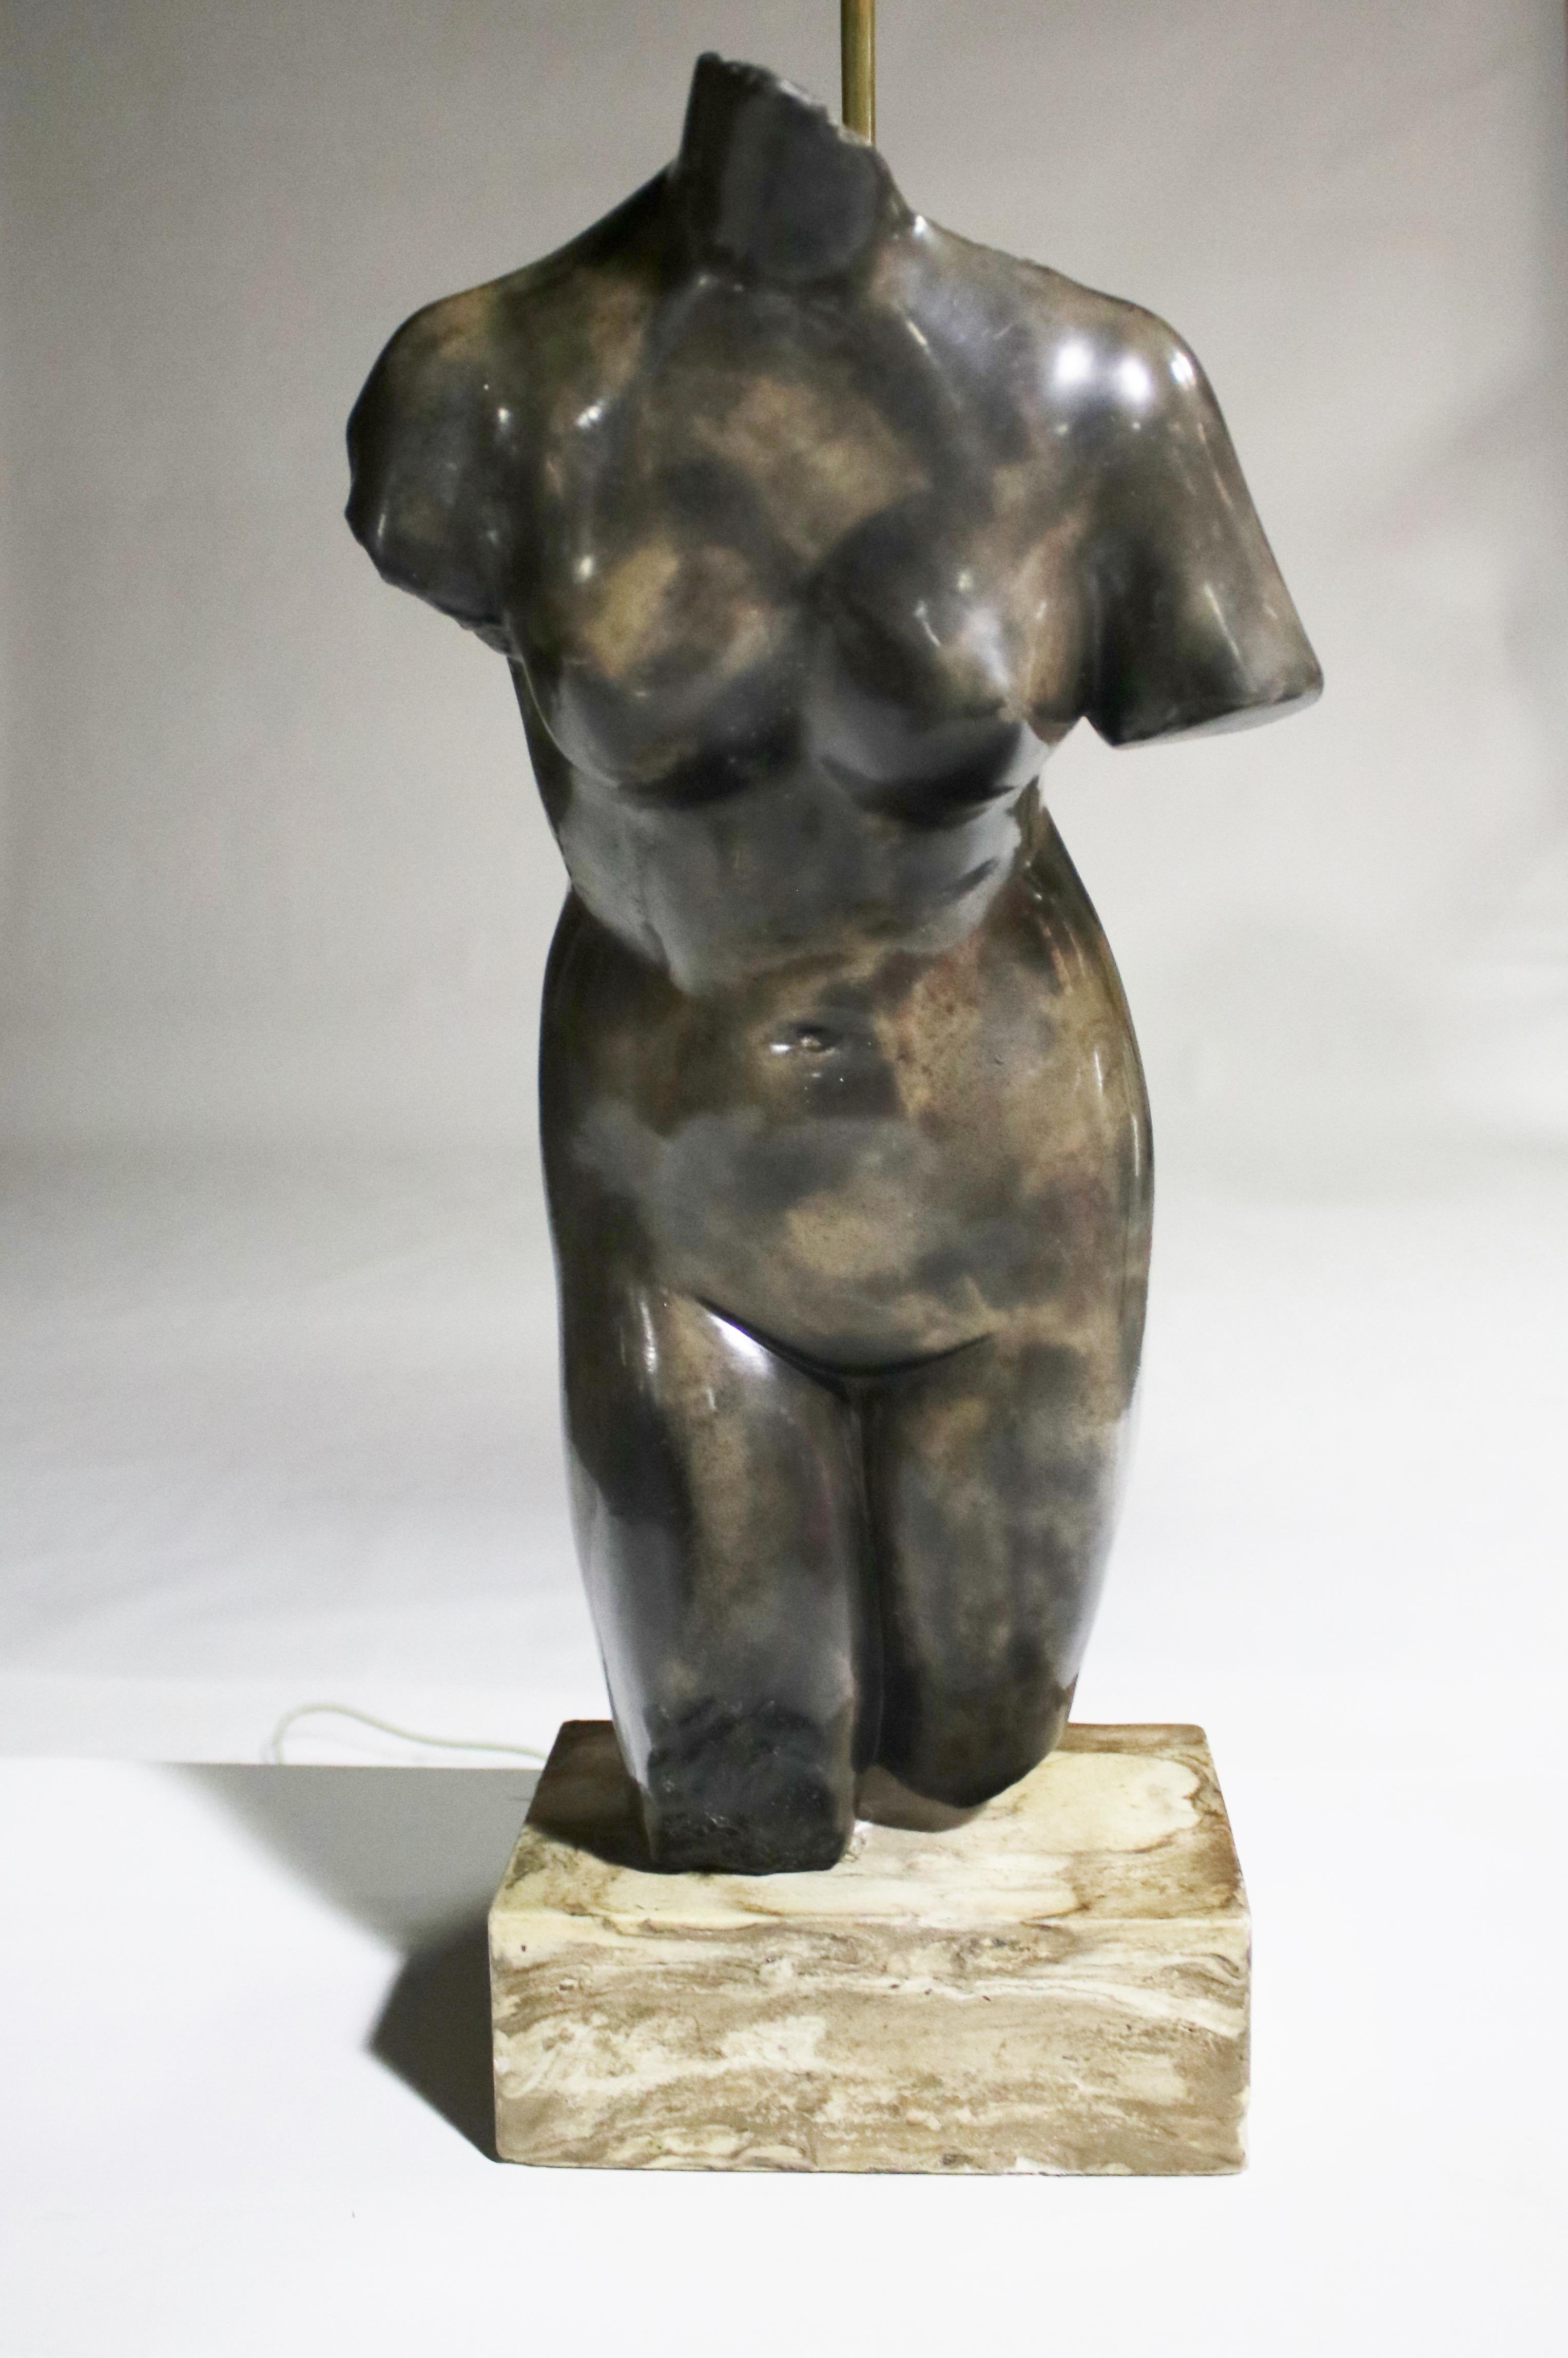 20th century modern Venus torso bust mounted as a lamp and made from cast polished stone/marble. Sculpture is removable from the plinth and shade not included for ease of shipment.